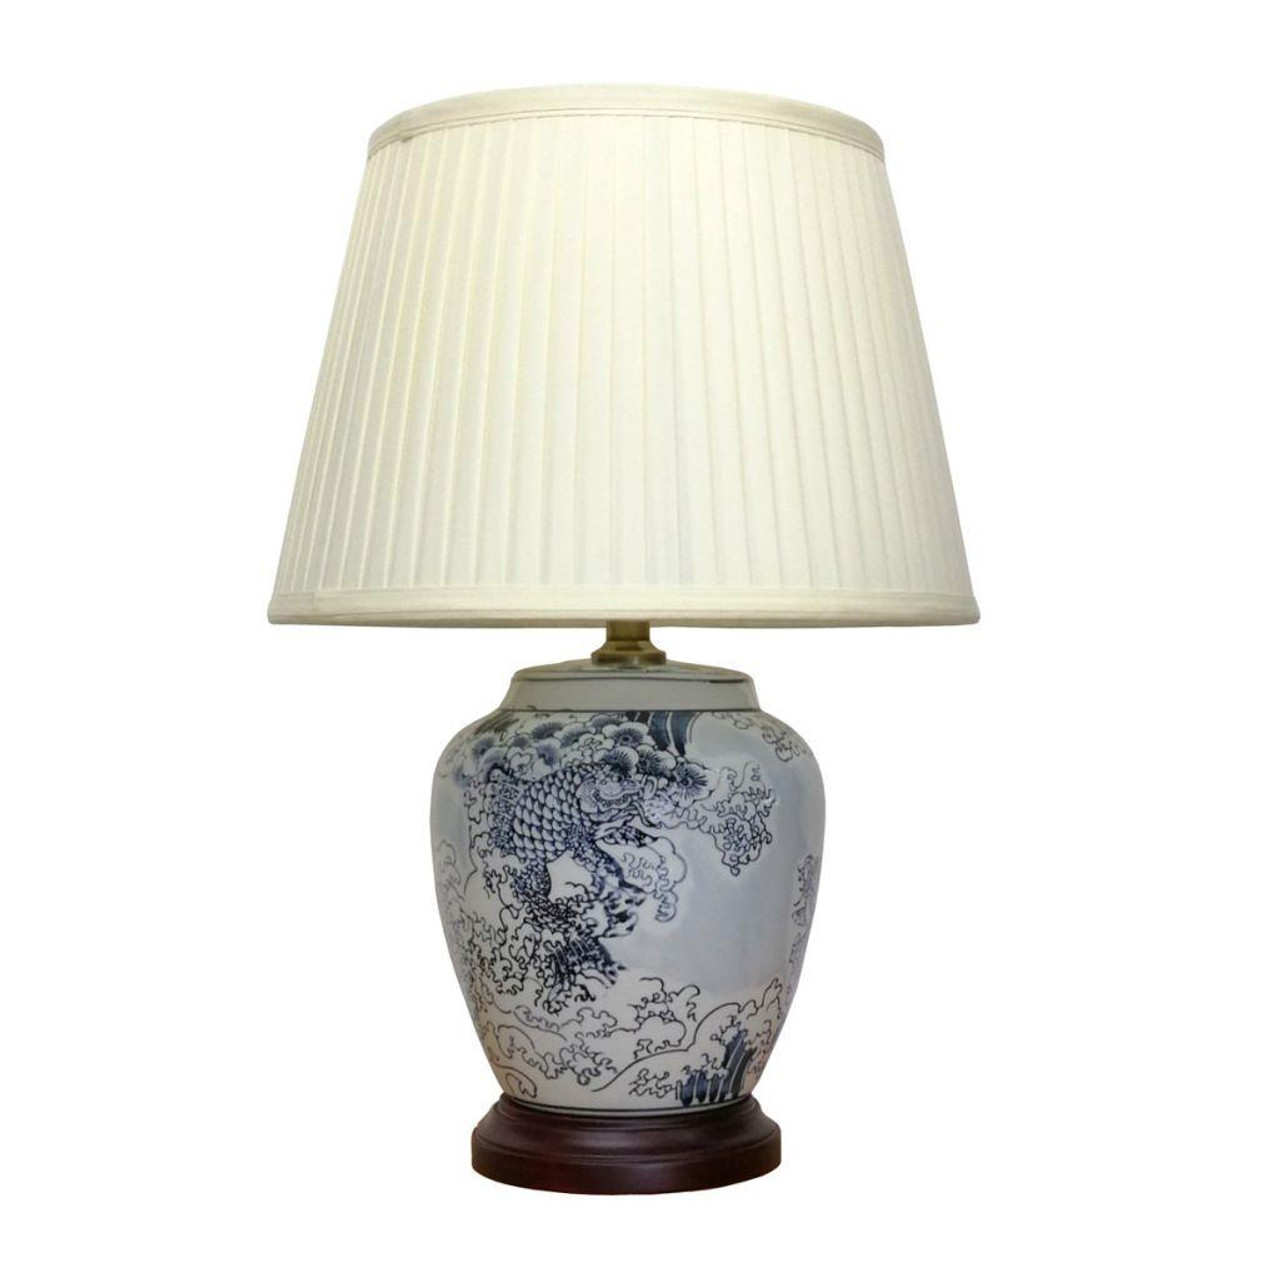 Chinese Table Lamp with Shade - Blue Waves and Fish Pattern - 51cm